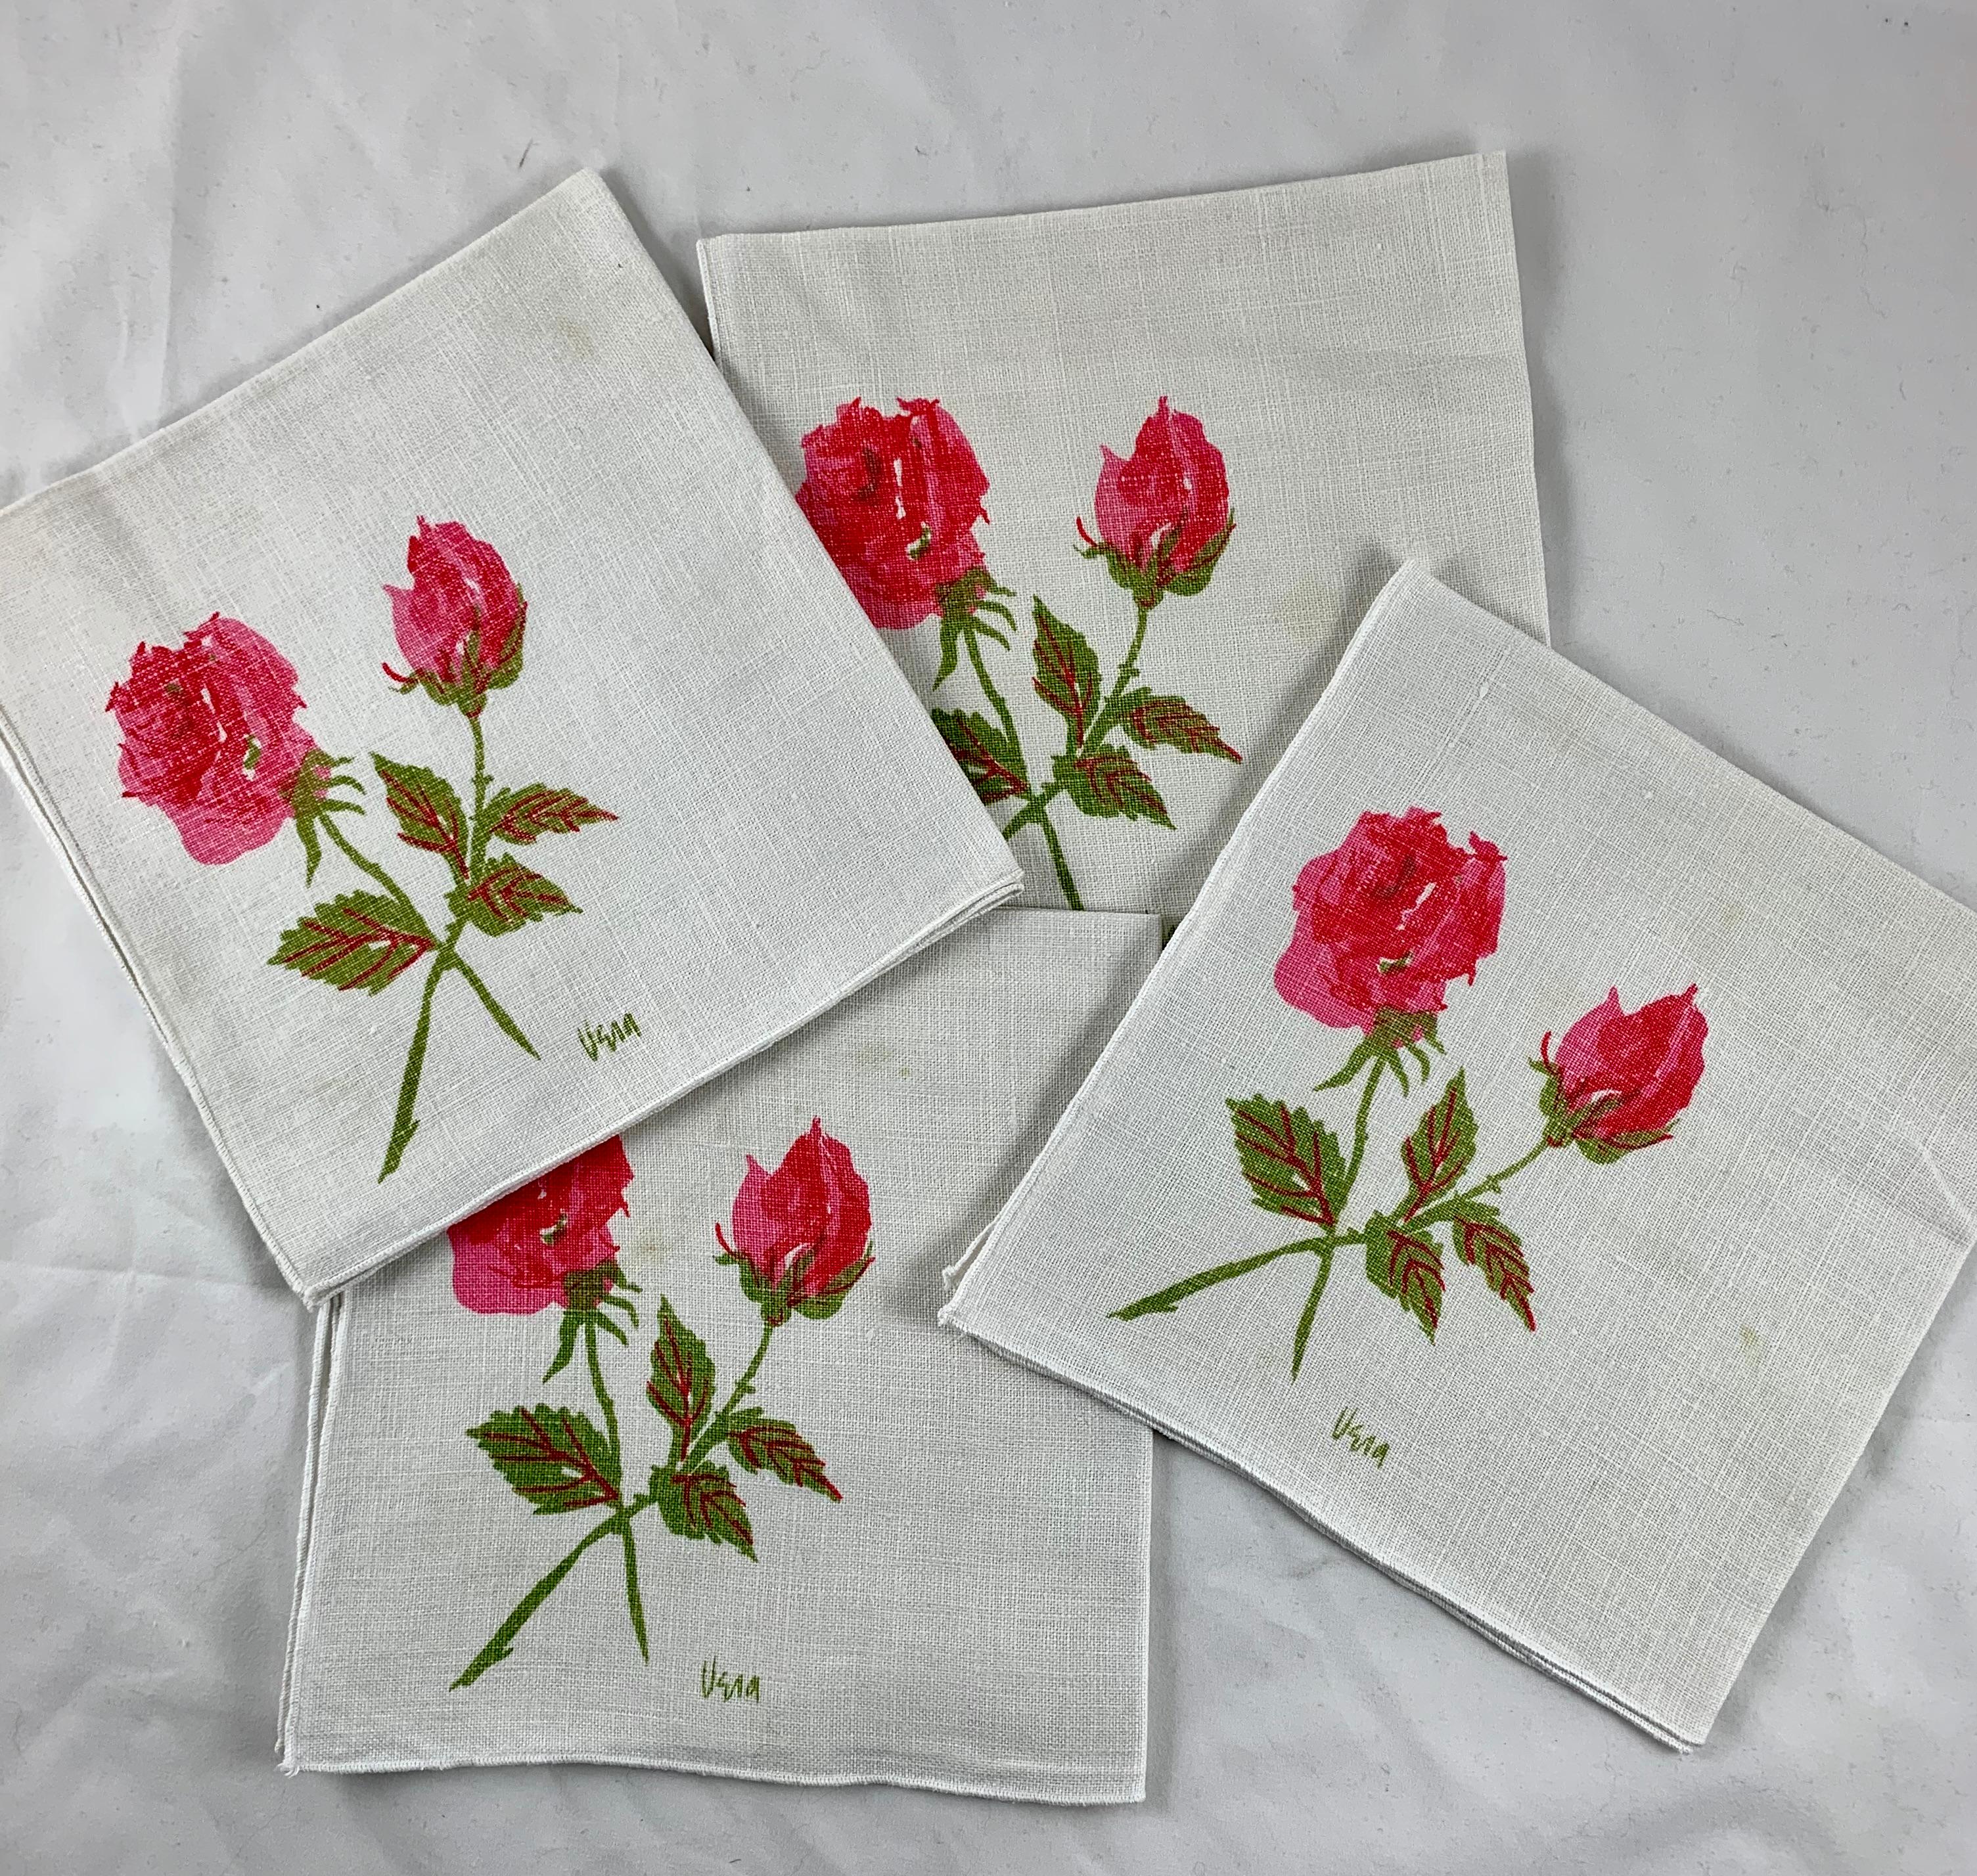 Vera Neumann 1950s Mid-Century Modern 8 Piece Rose Placemat & Napkin Set for 4  In Good Condition For Sale In Philadelphia, PA